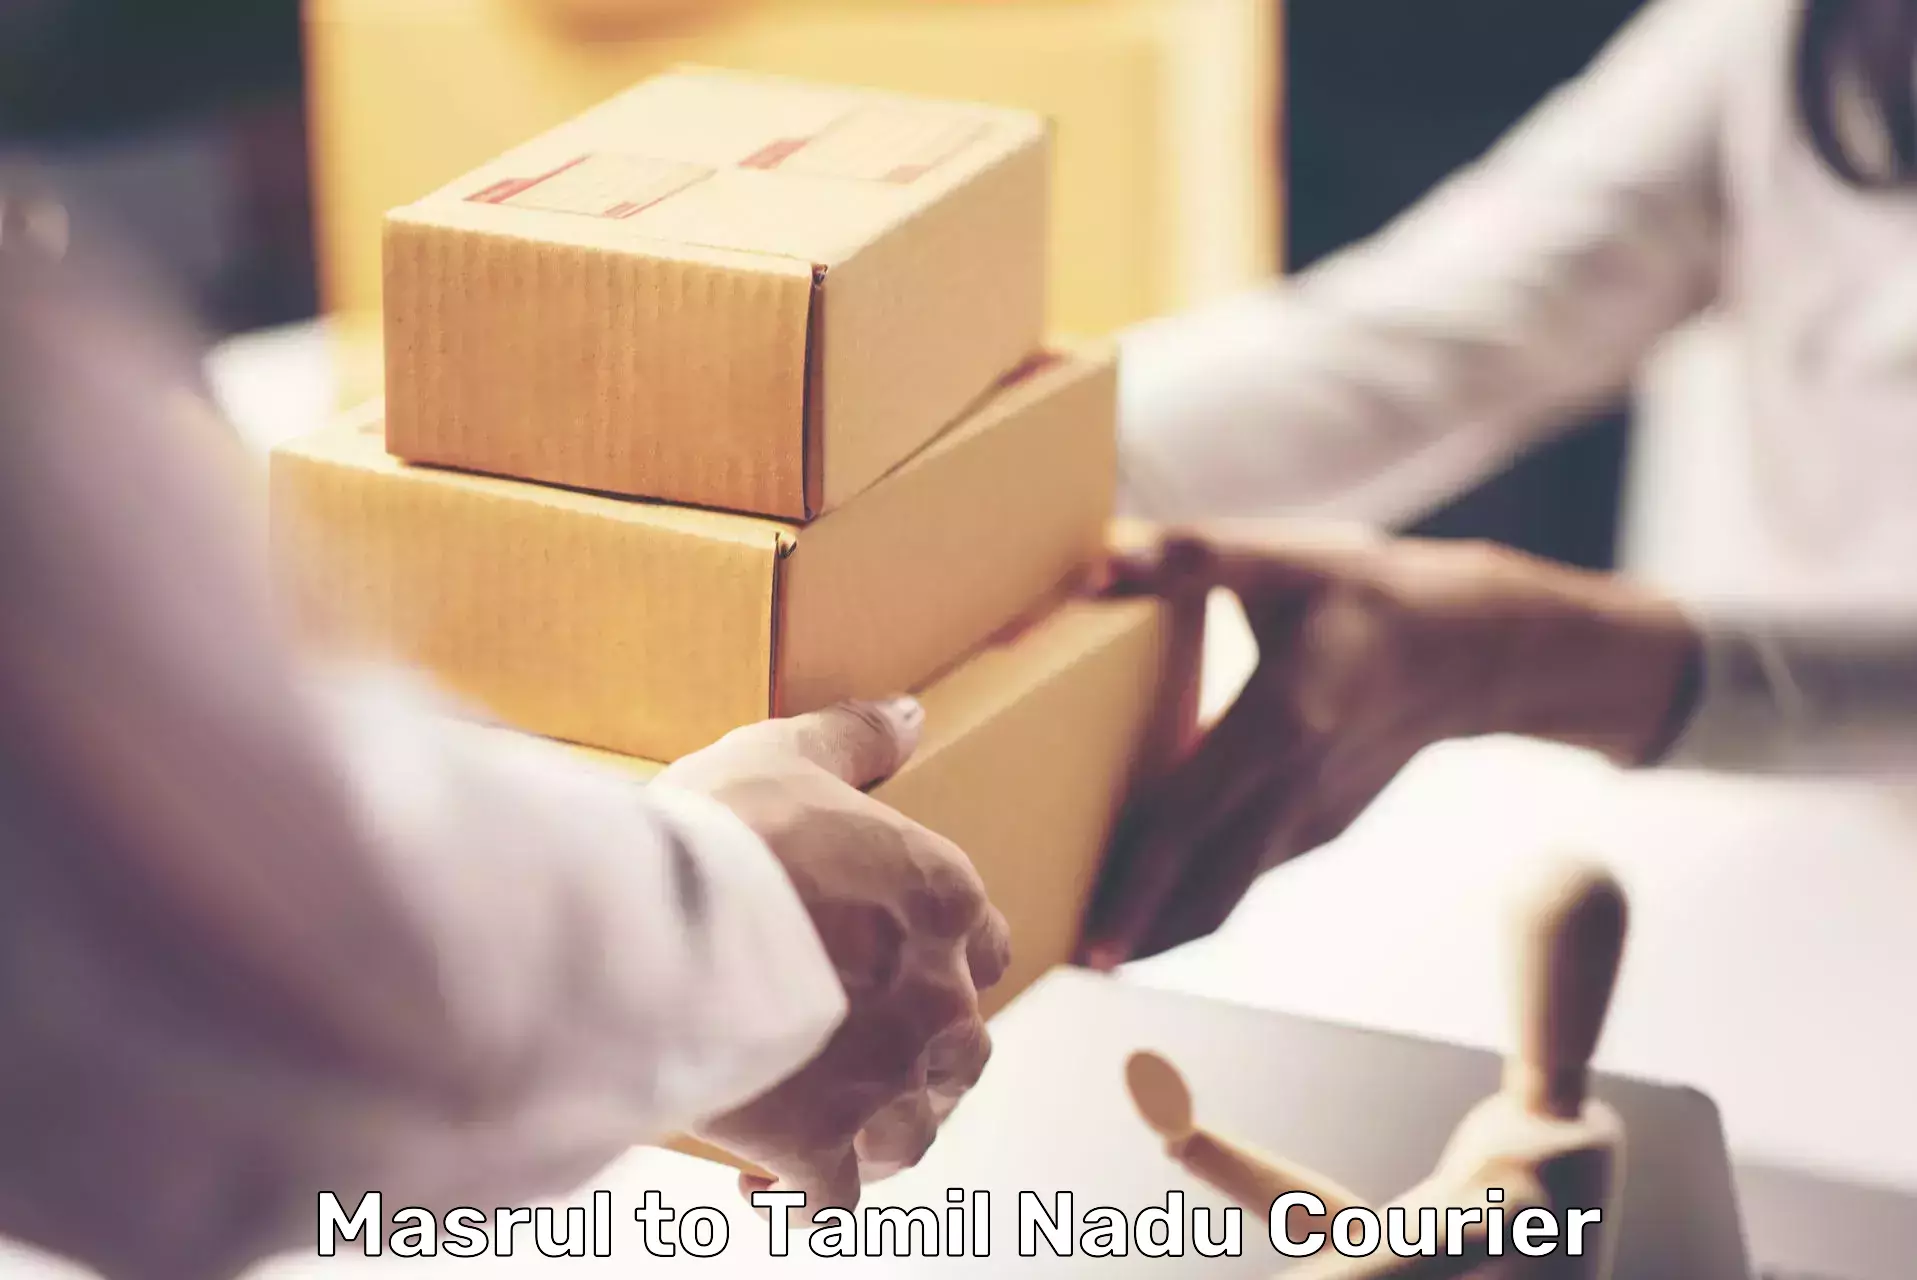 Simplified shipping solutions in Masrul to Tirukalukundram